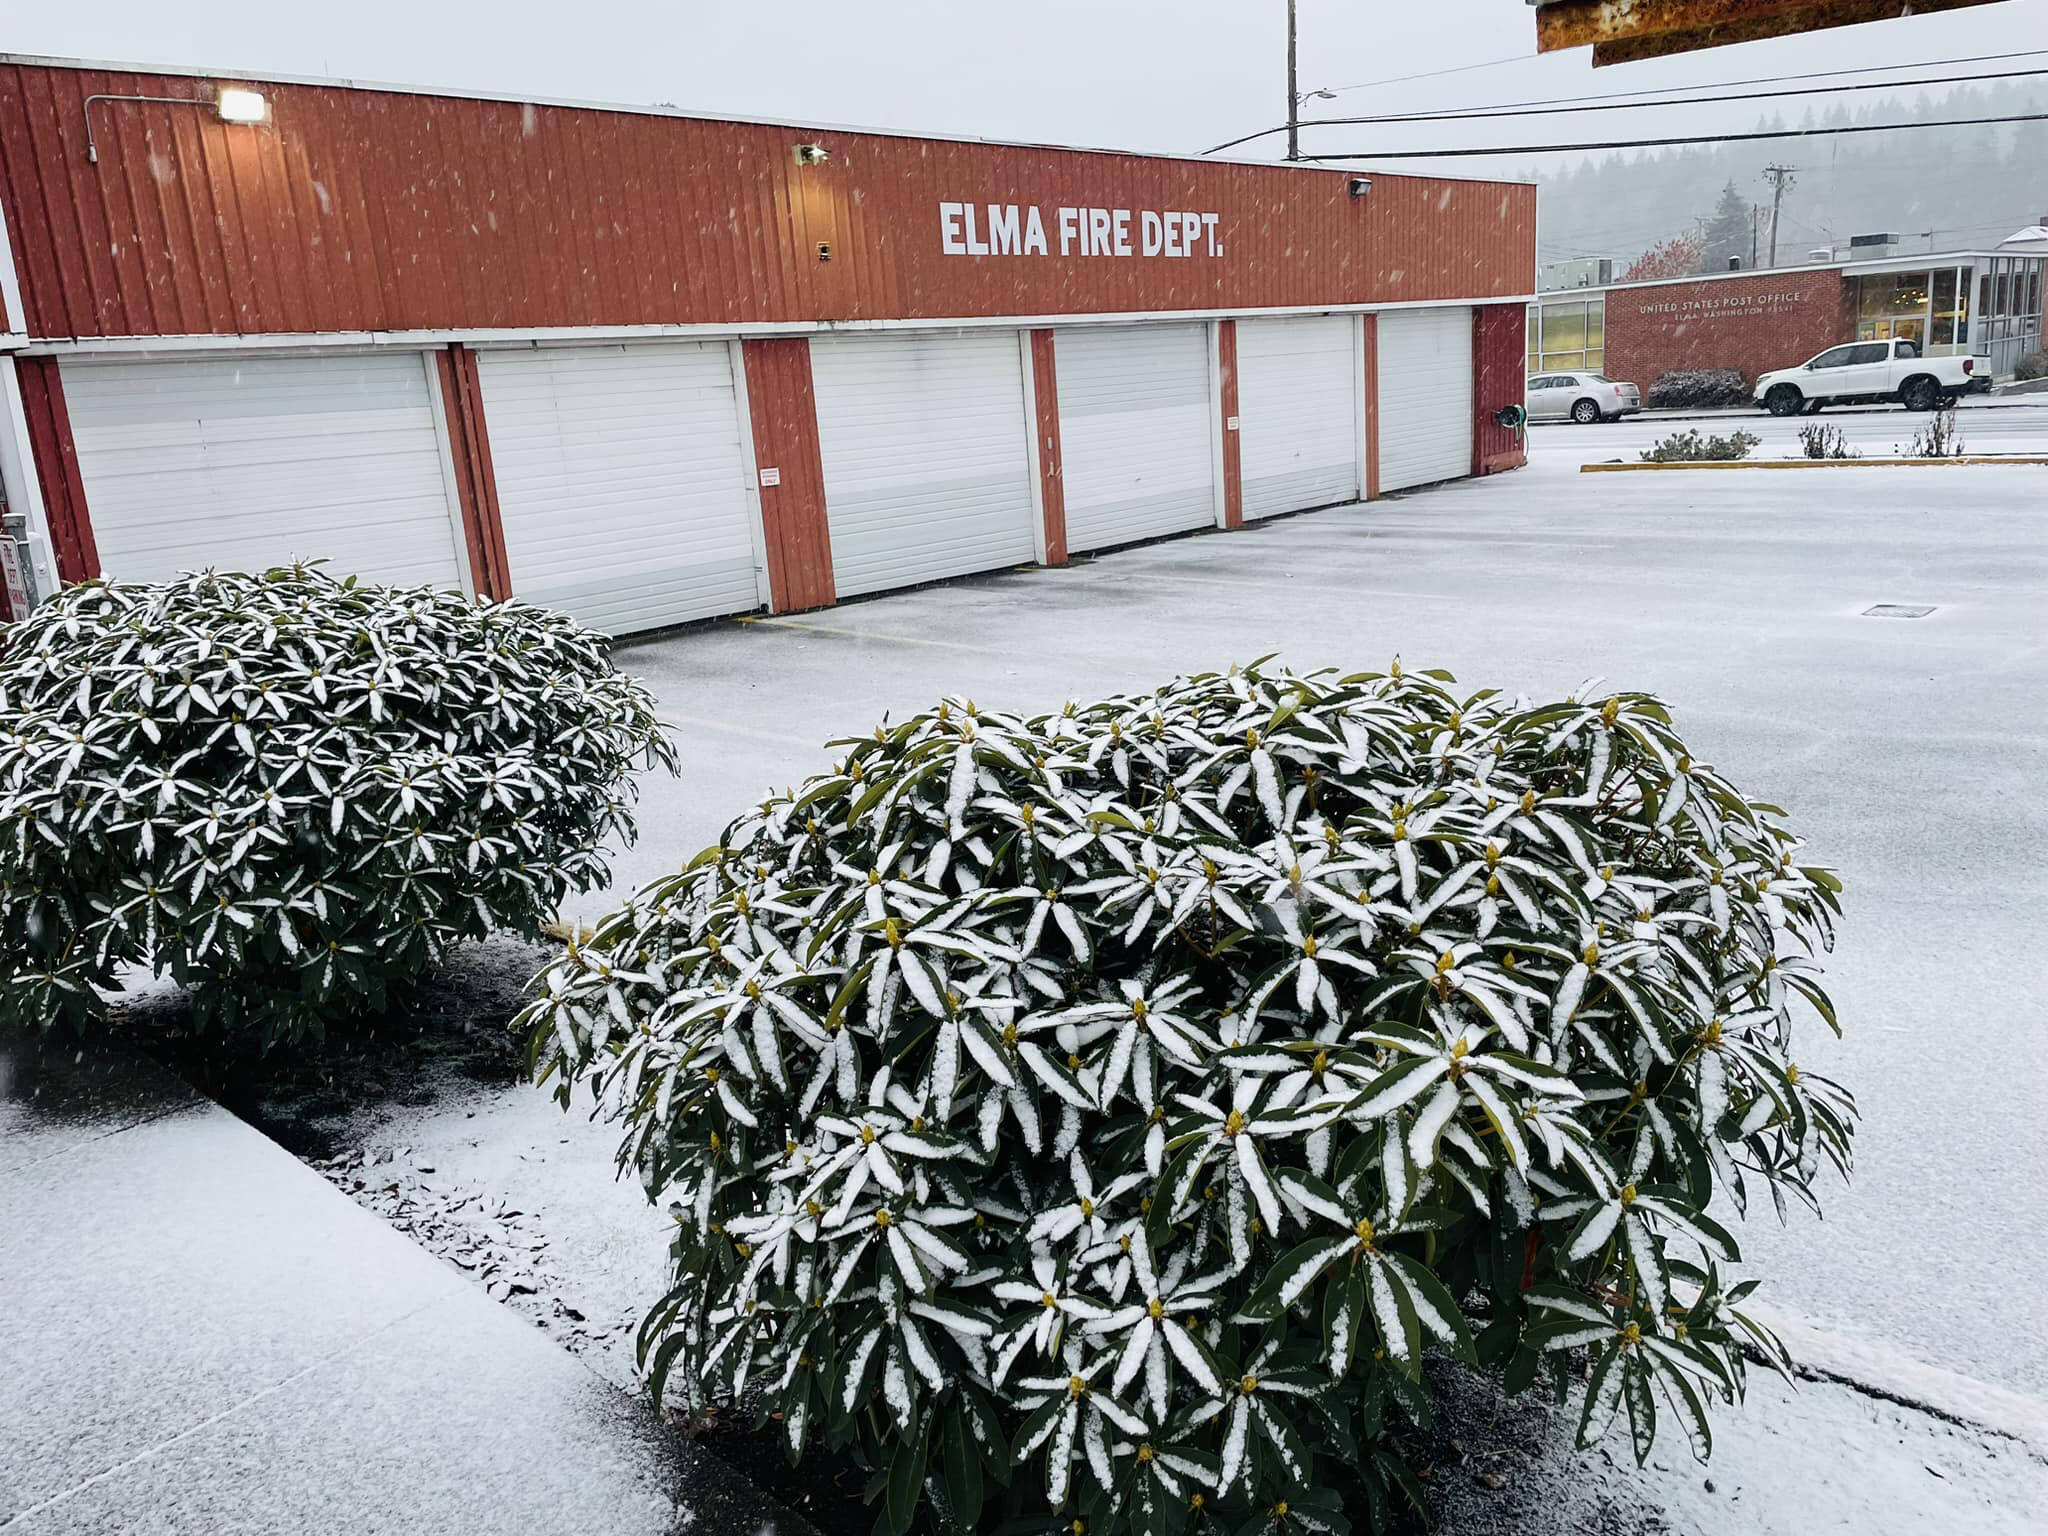 East Grays Harbor Fire and Rescue 
The East Grays Harbor Fire and Rescue received some snow on Monday and Tuesday, but stated they are ready to assist those in need. They also suggested drivers give themselves plenty of time on the roadway.